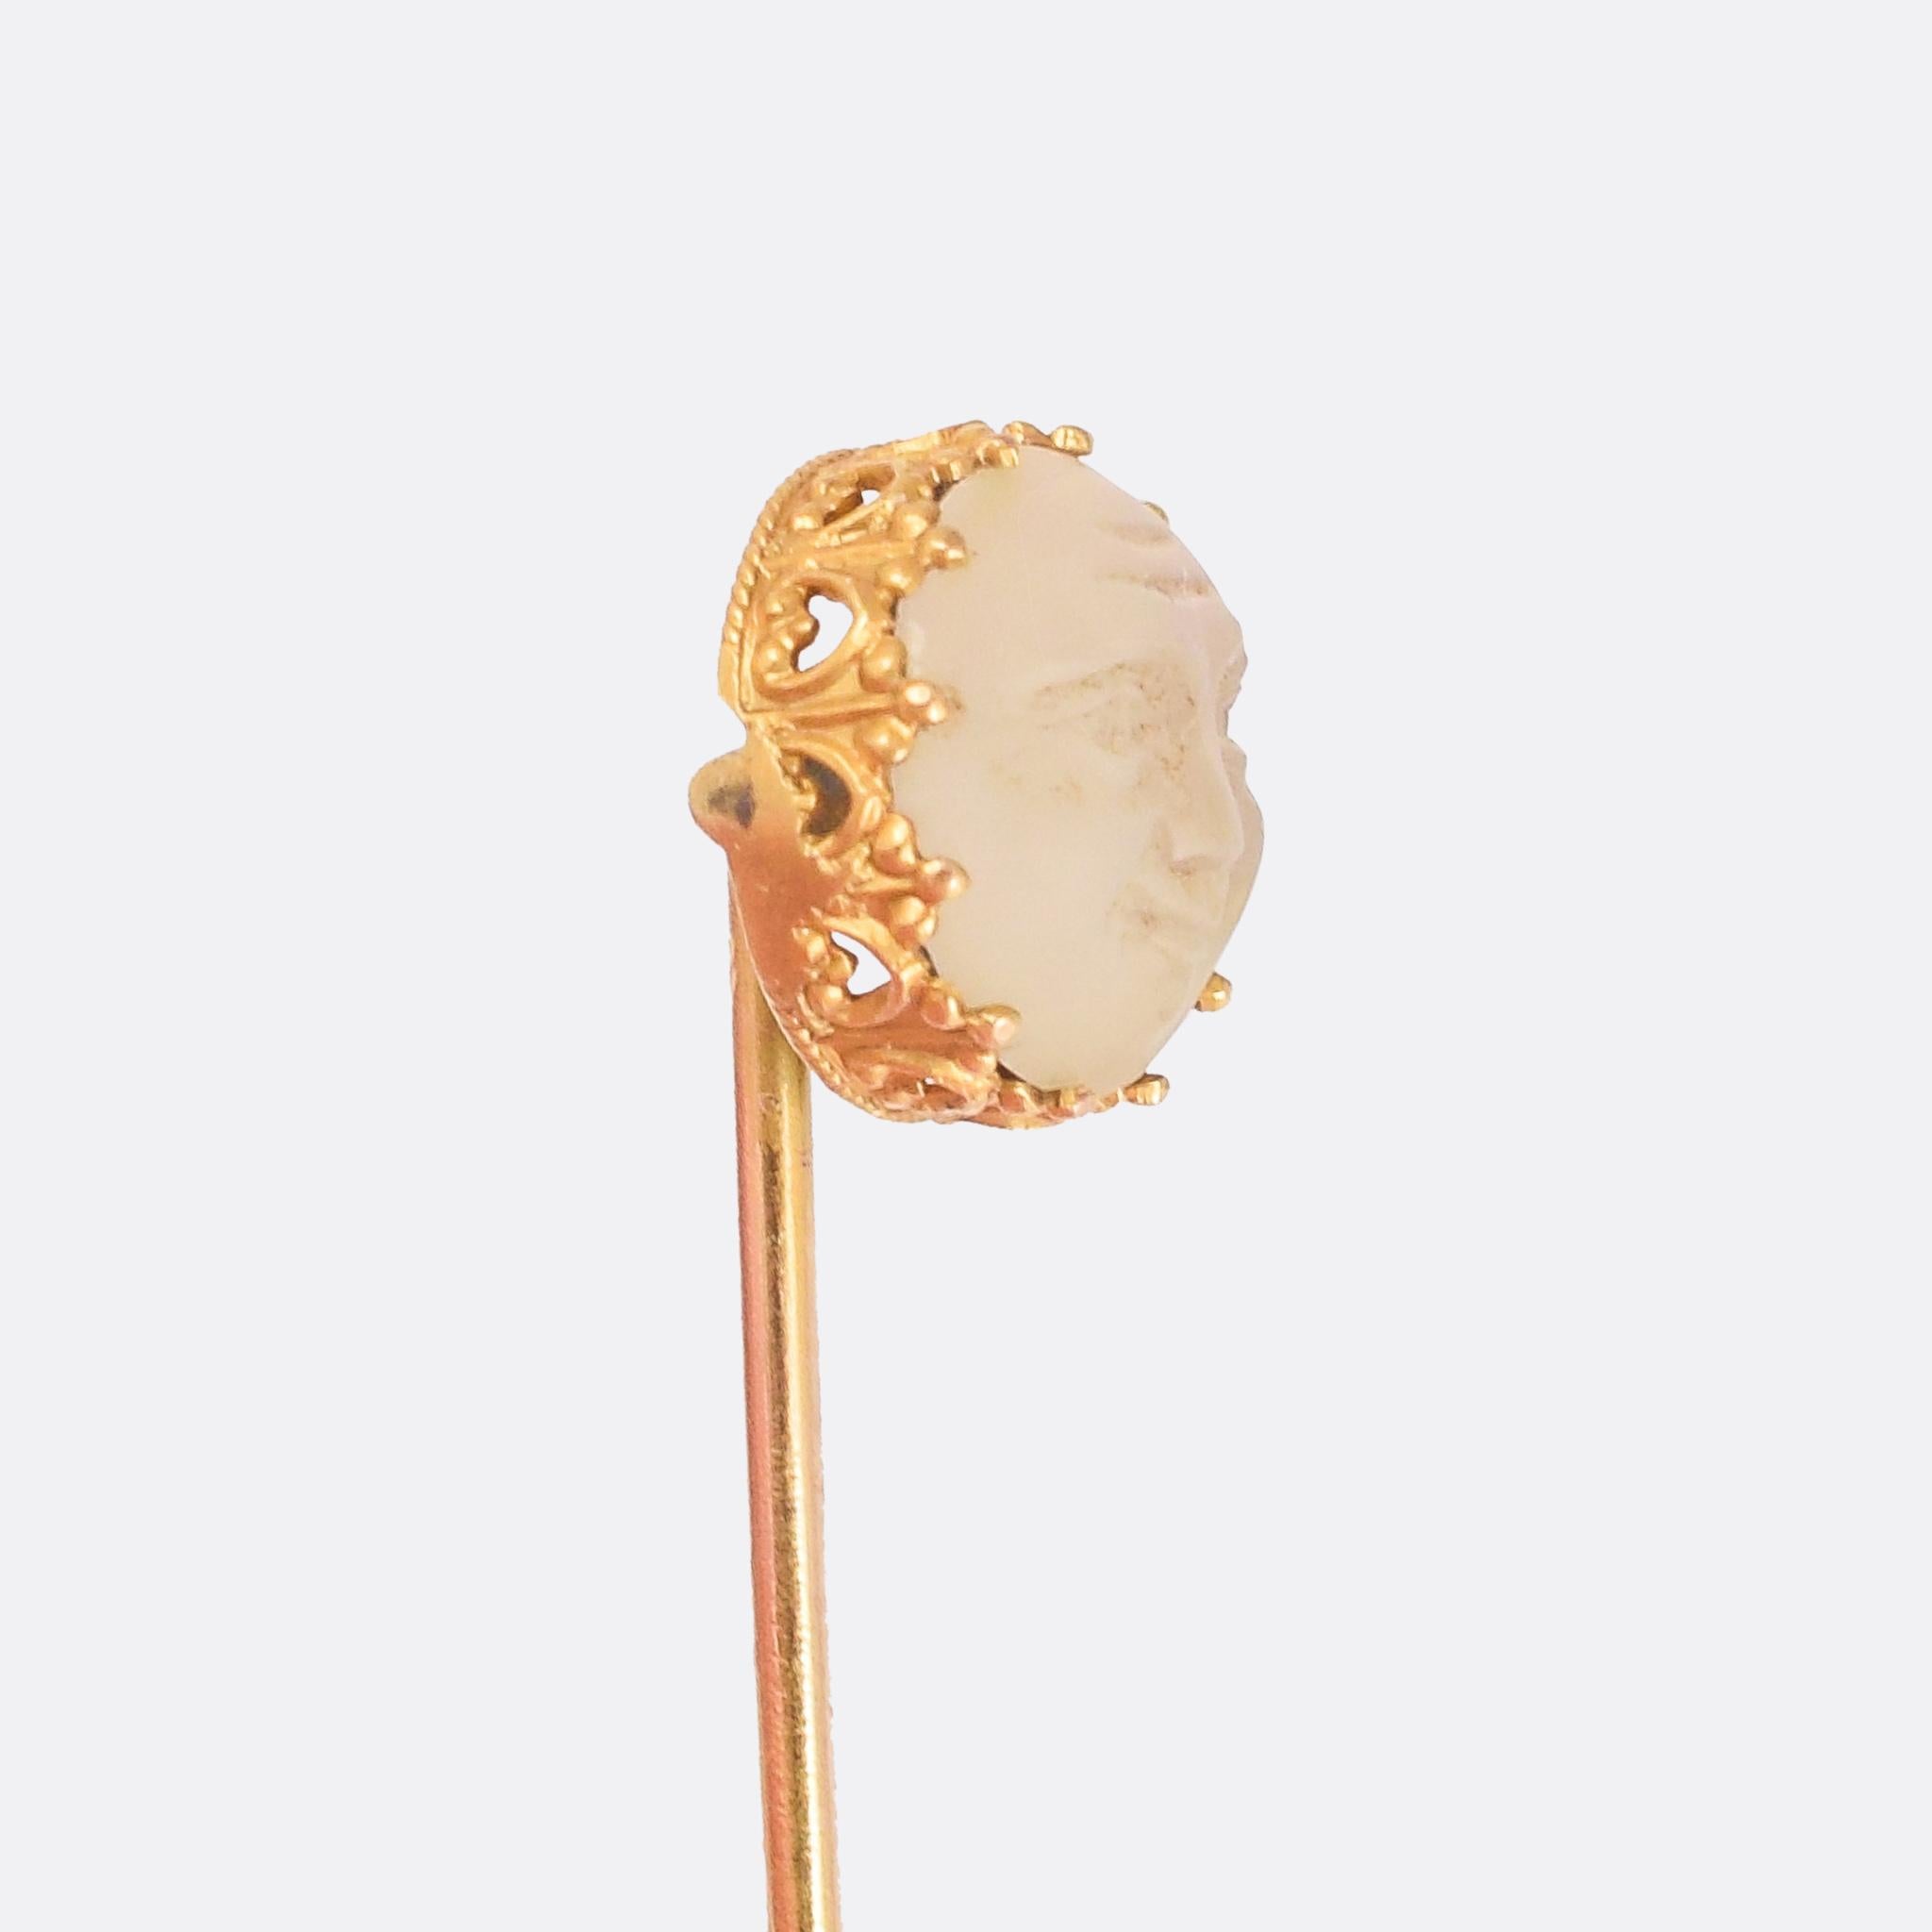 A gorgeous Man In The Moon pin dating from the late Victorian era. The moonstone displays shimmering multi-coloured adularescence, and has been carved with a face. The mount is beautifully detailed, crafted in 15 karat gold.

STONES